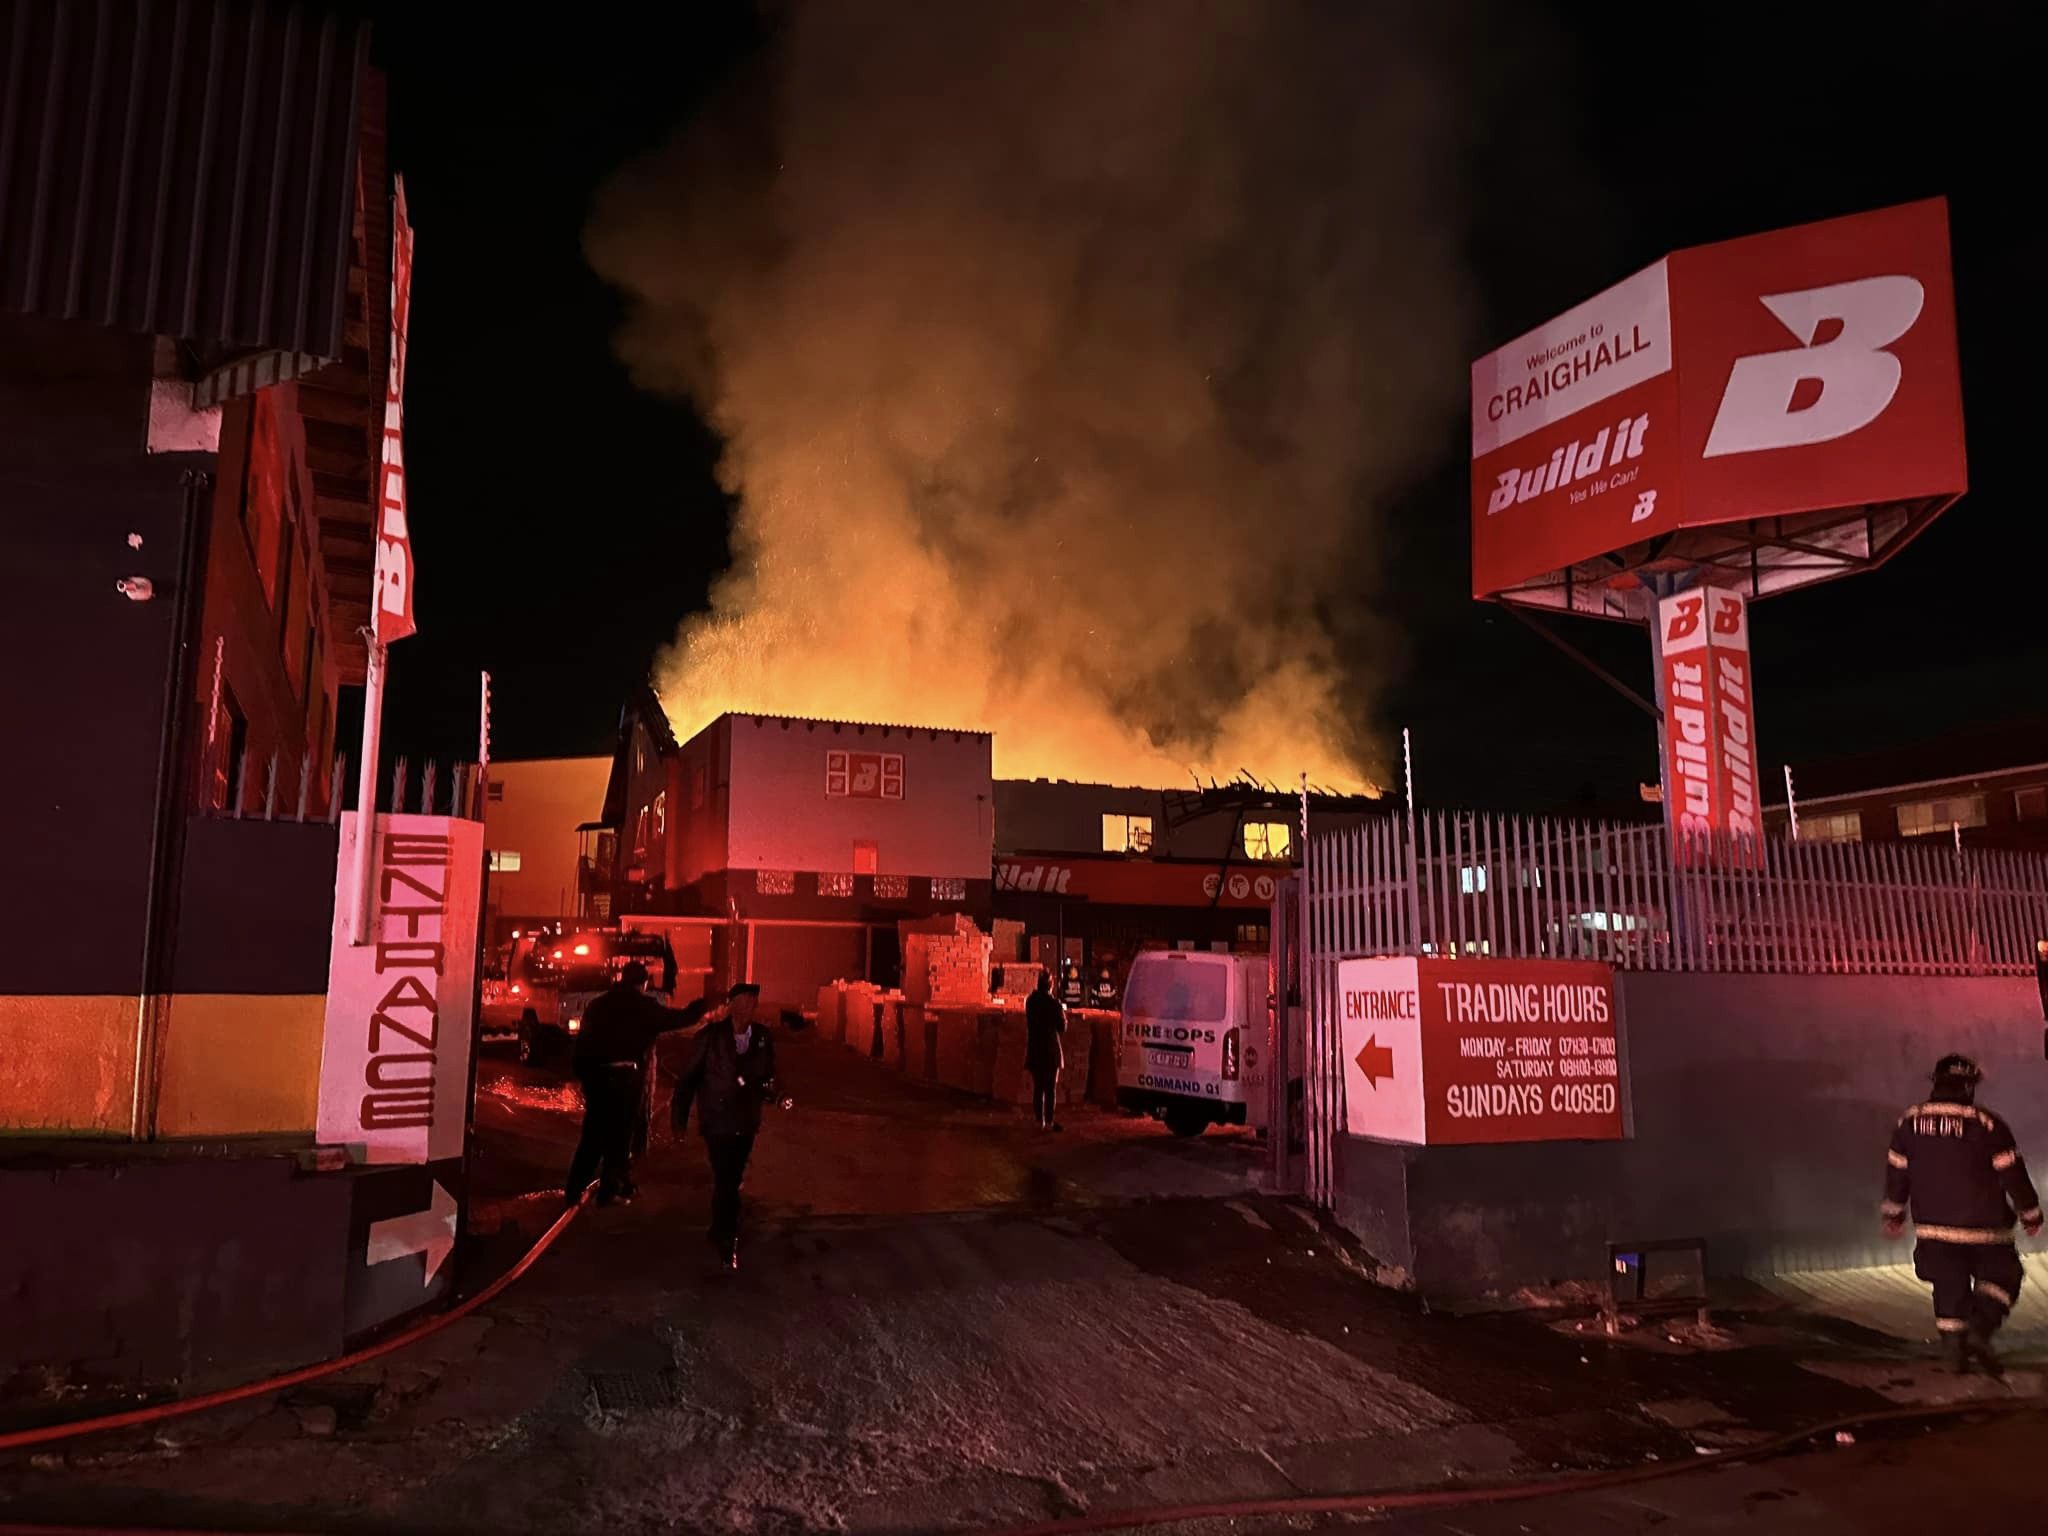 Large building on fire in the Craighall area of Johannesburg